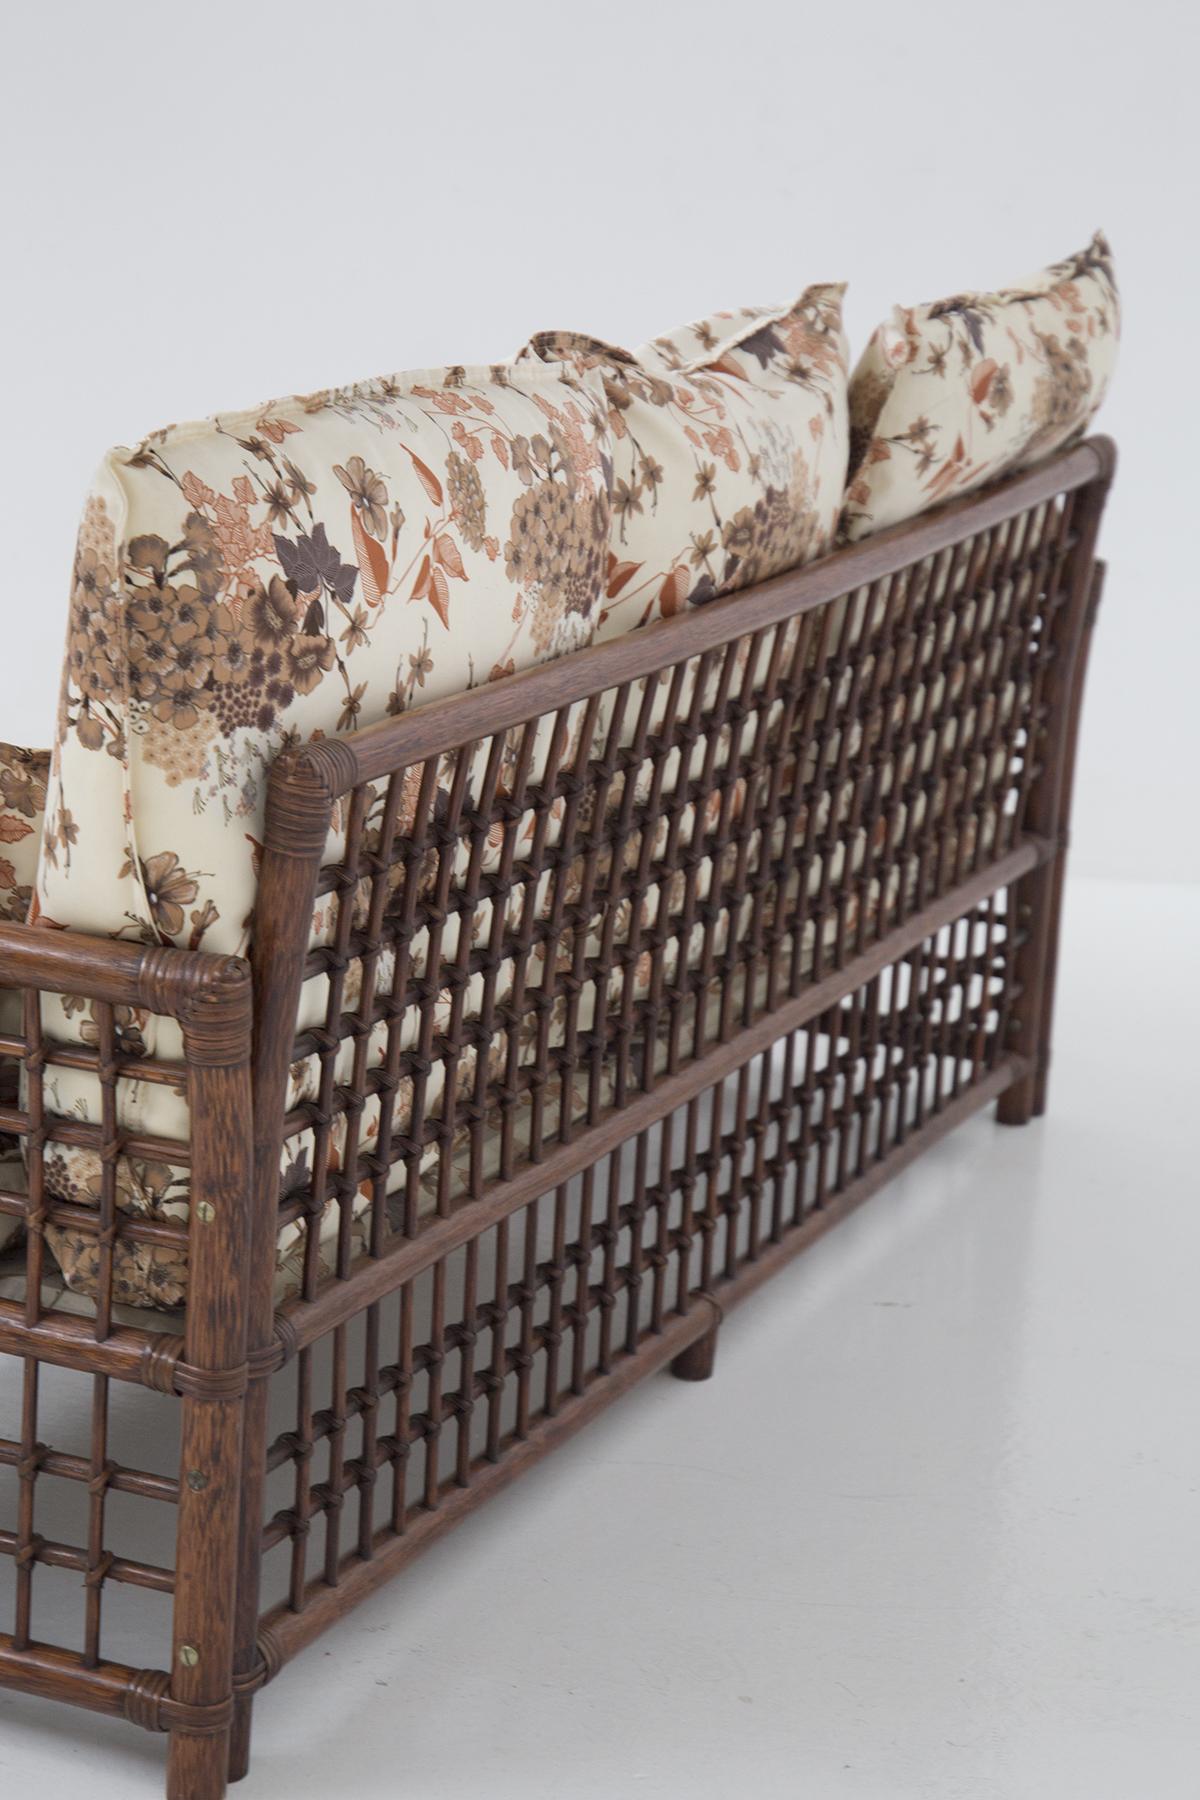 Vivai del Sud Vintage Wood and Rattan Sofa W Floral Fabric For Sale 2